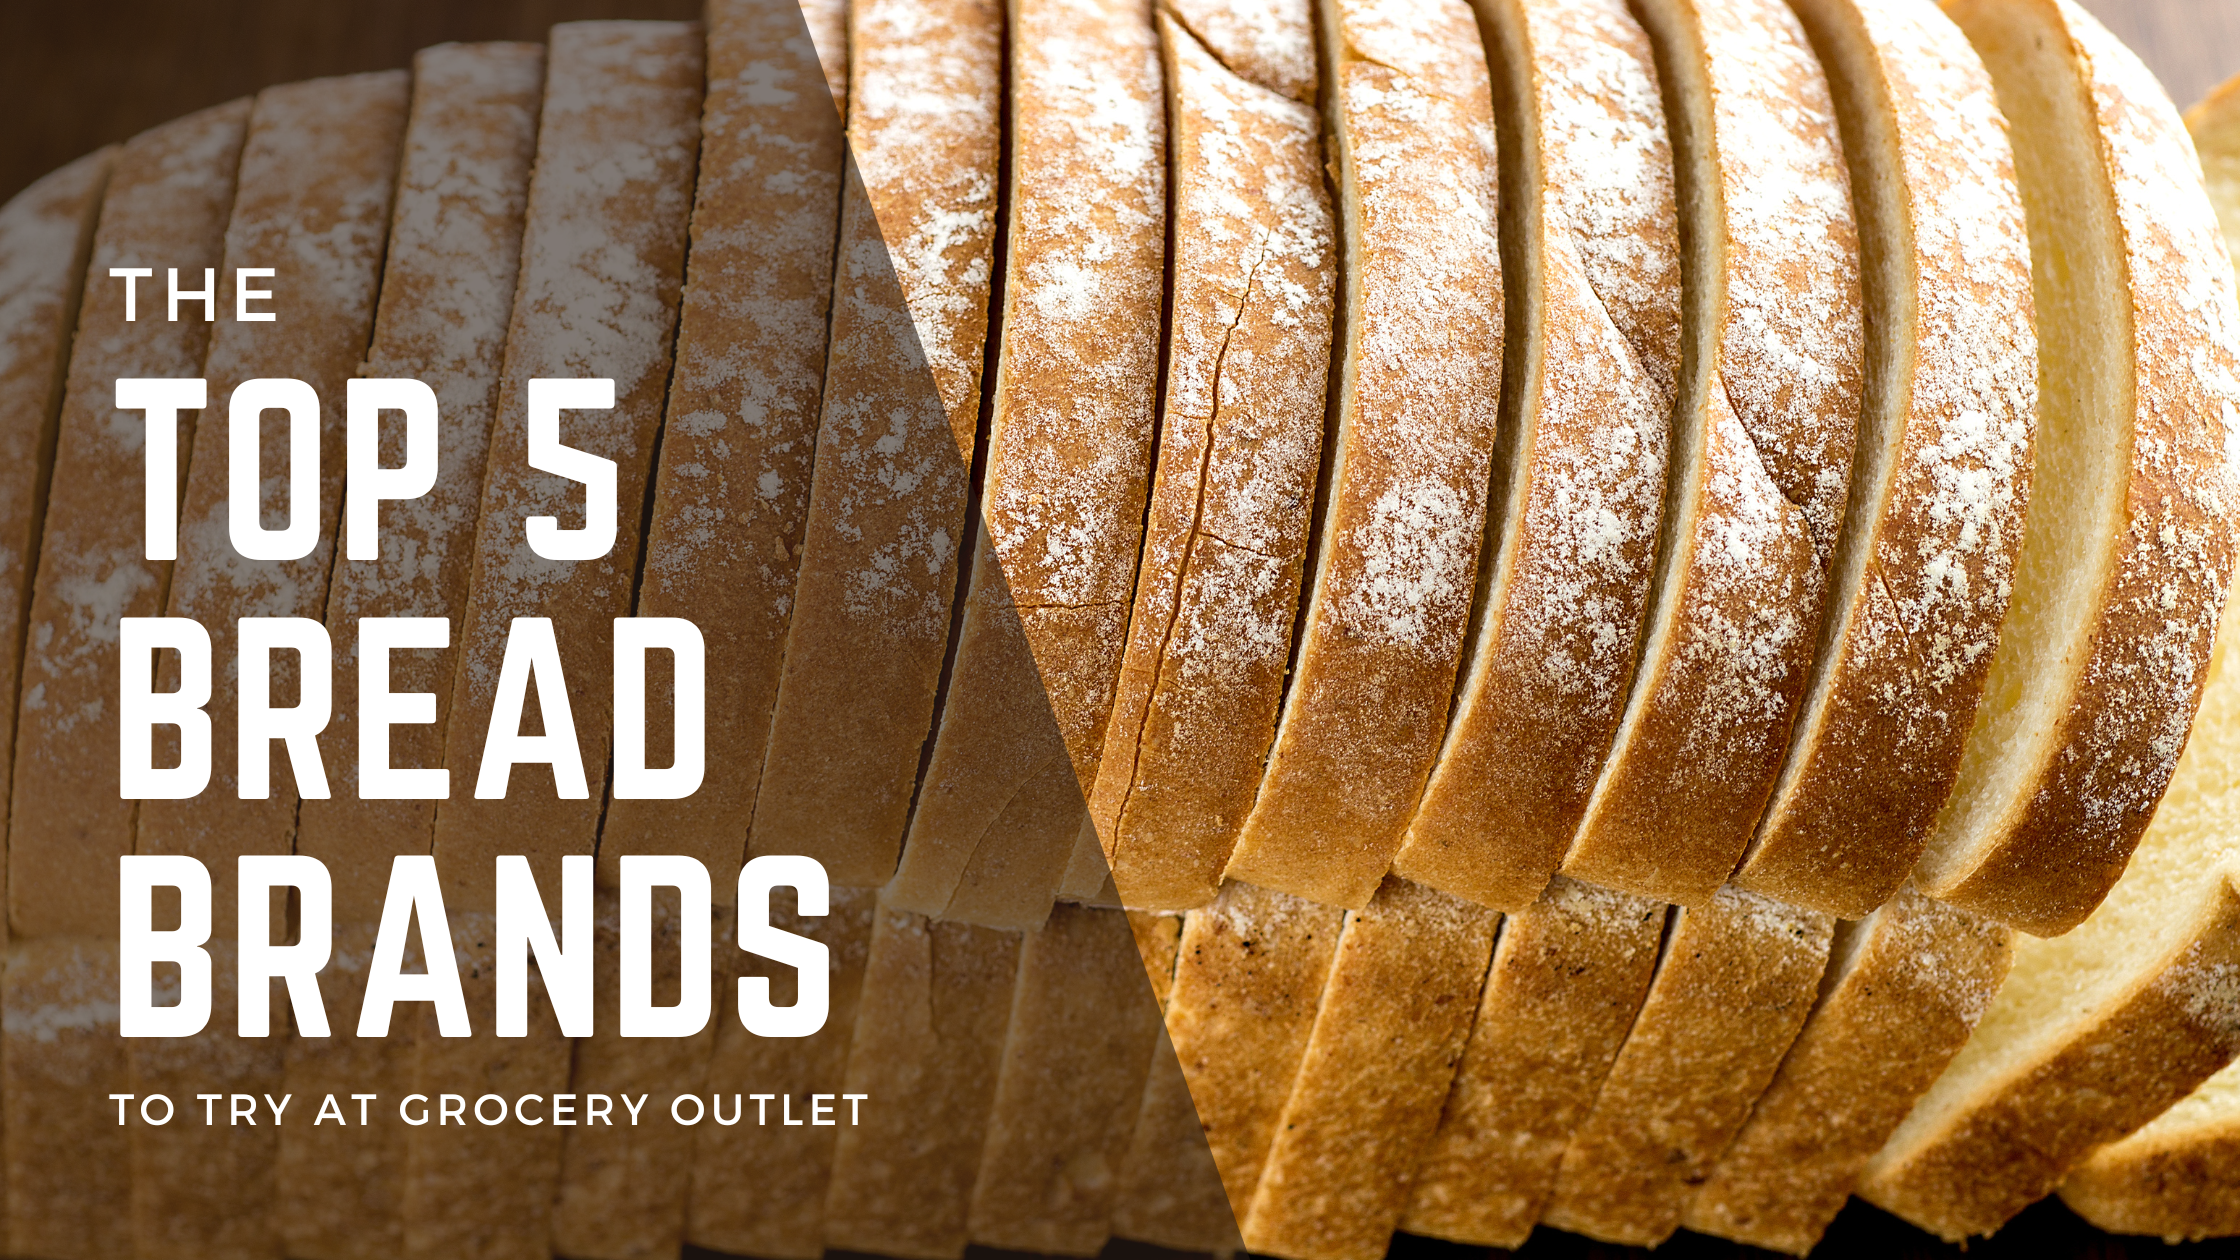 Top 5 Bread Brands at Grocery Outlet hero image